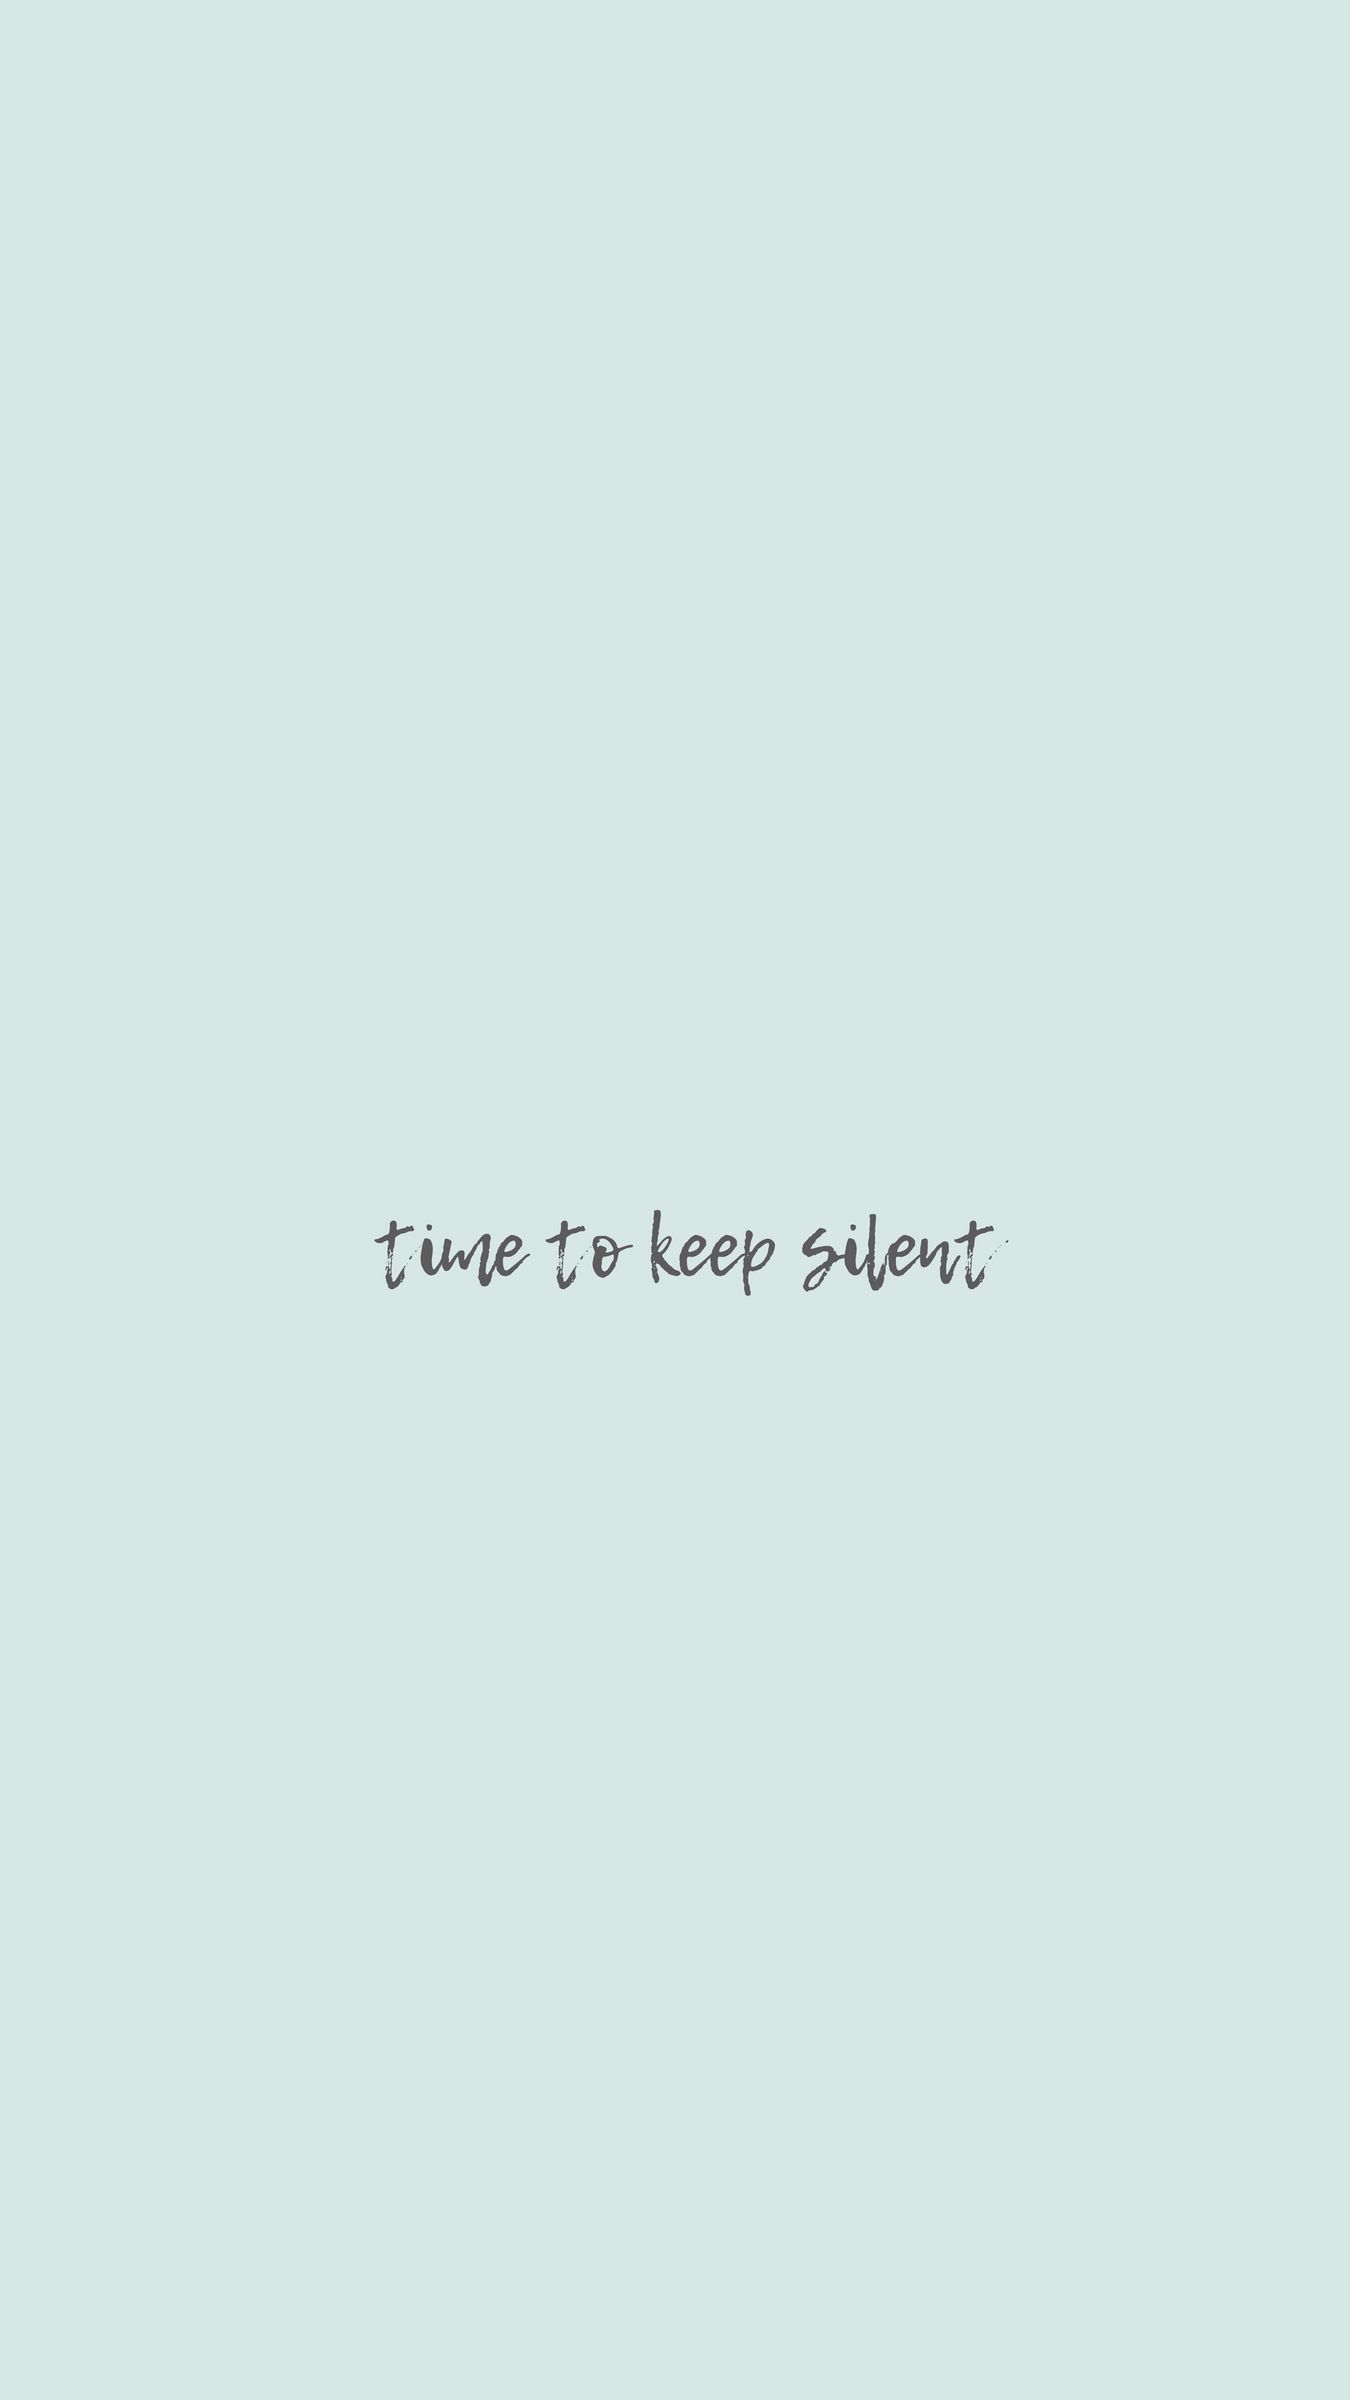 Download free Silence Mobile Wallpaper contributed by mccullough Silence  Mobile Wallpaper is upload  Silence quotes Inspirational quotes Funny  quotes wallpaper